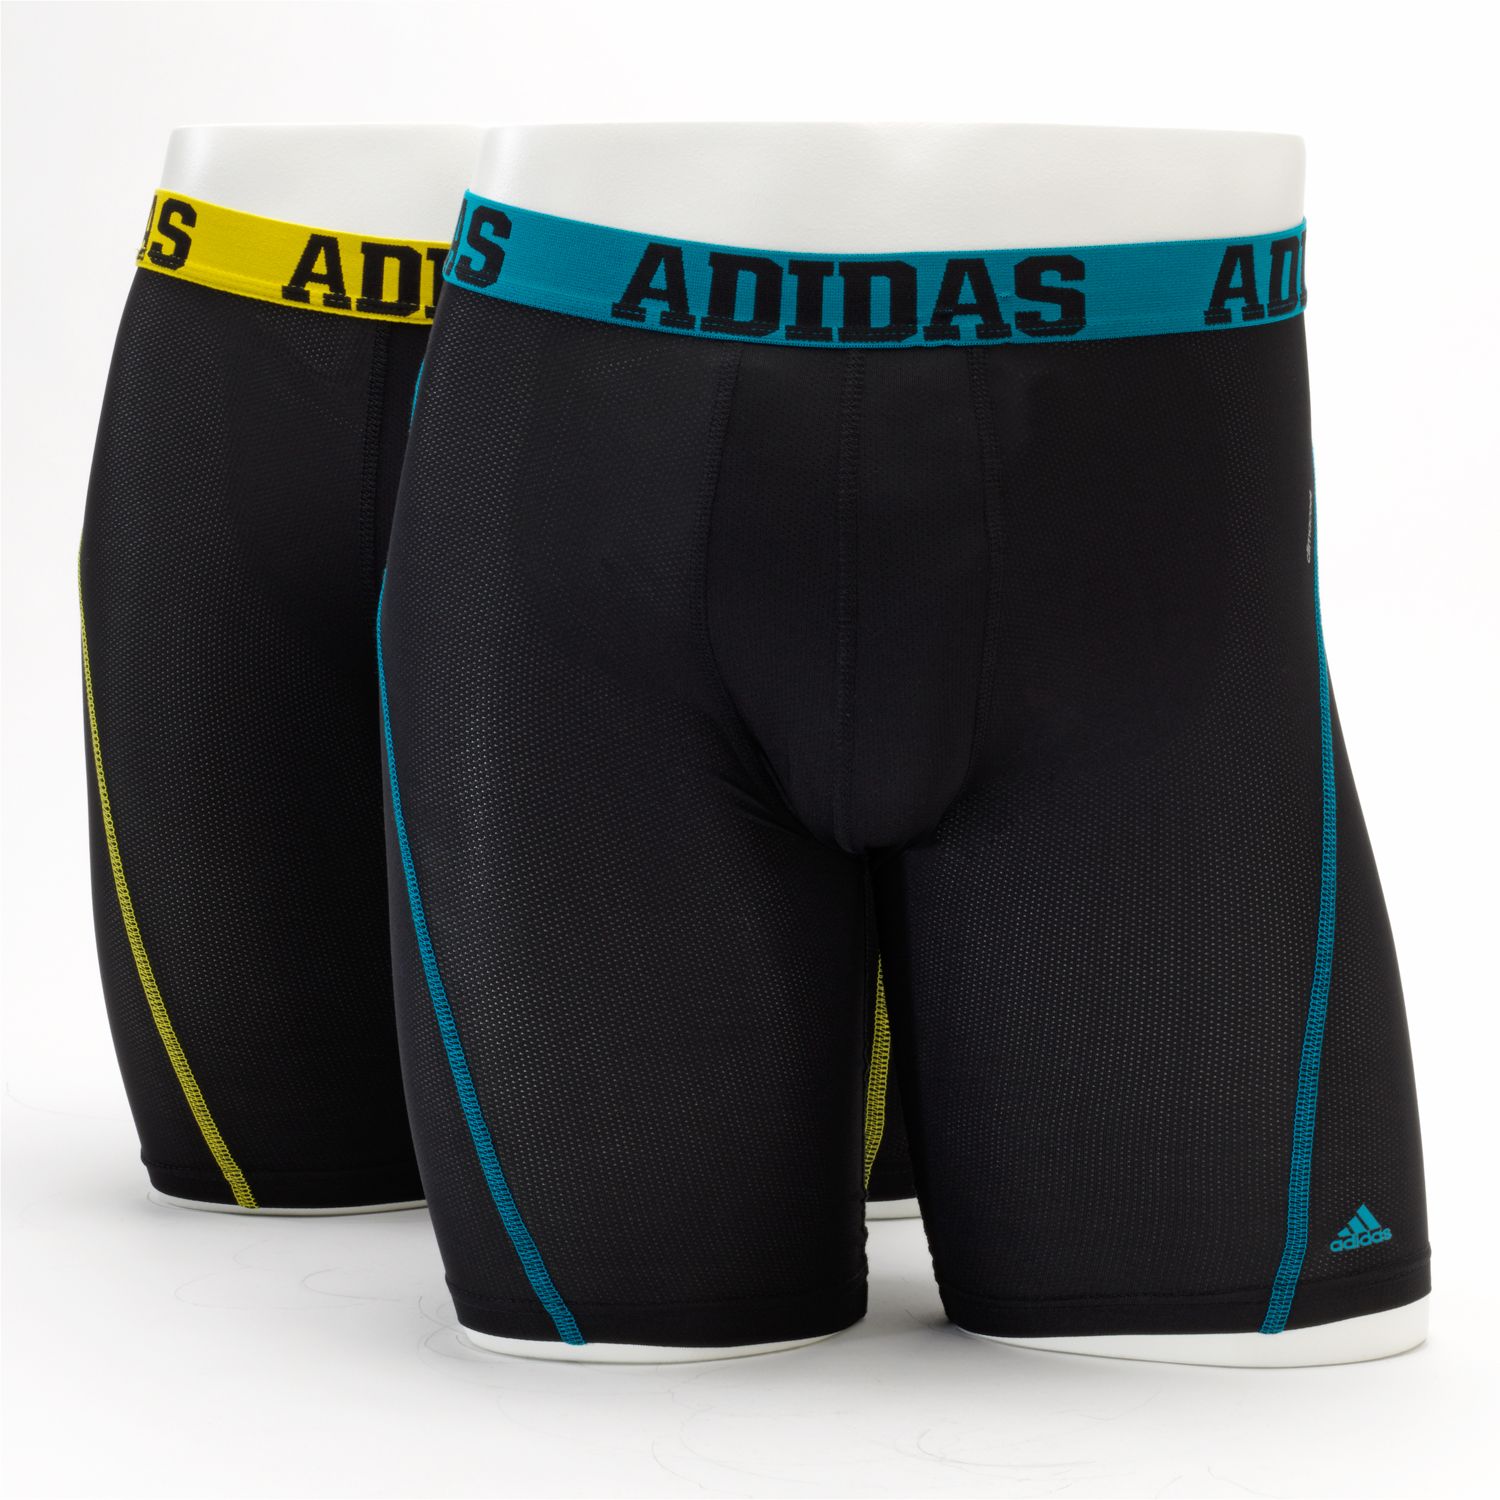 adidas midway boxer briefs